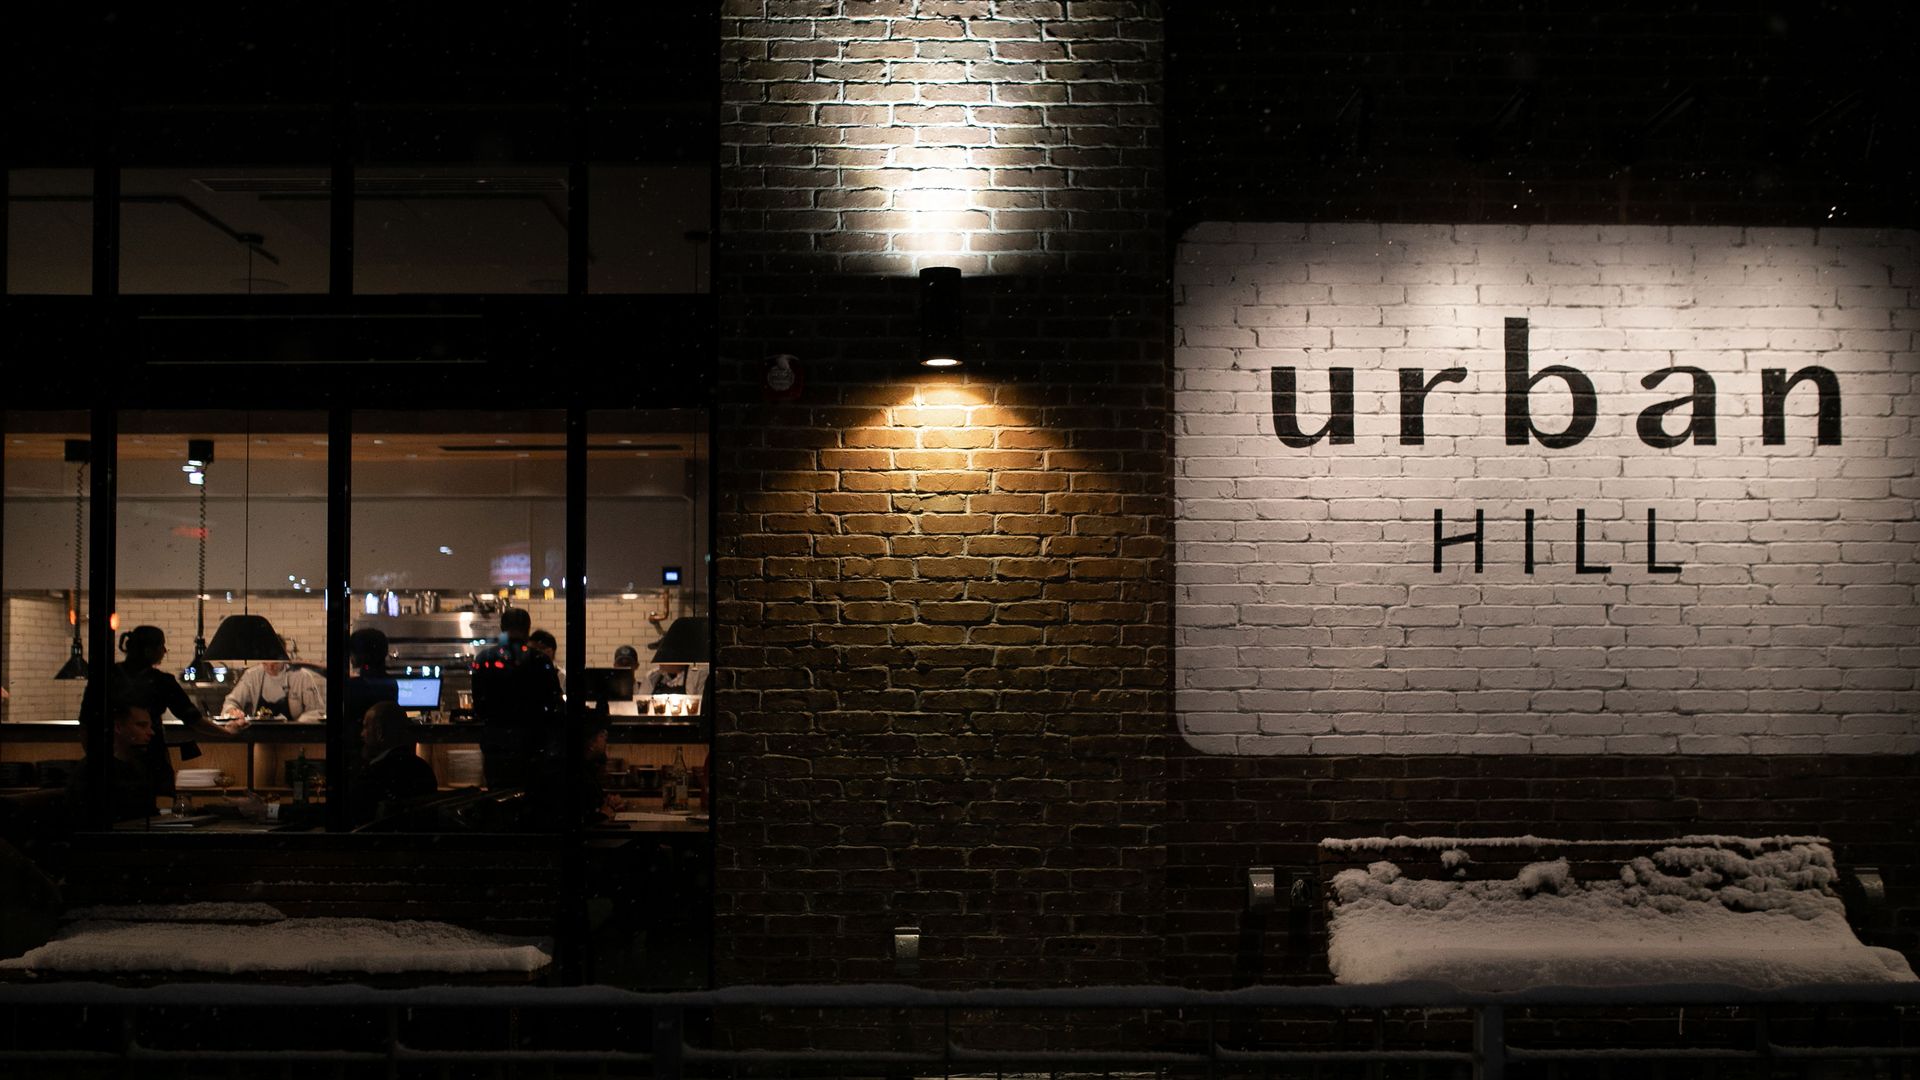 The store front of Urban Hill, a fine-dining restaurant.